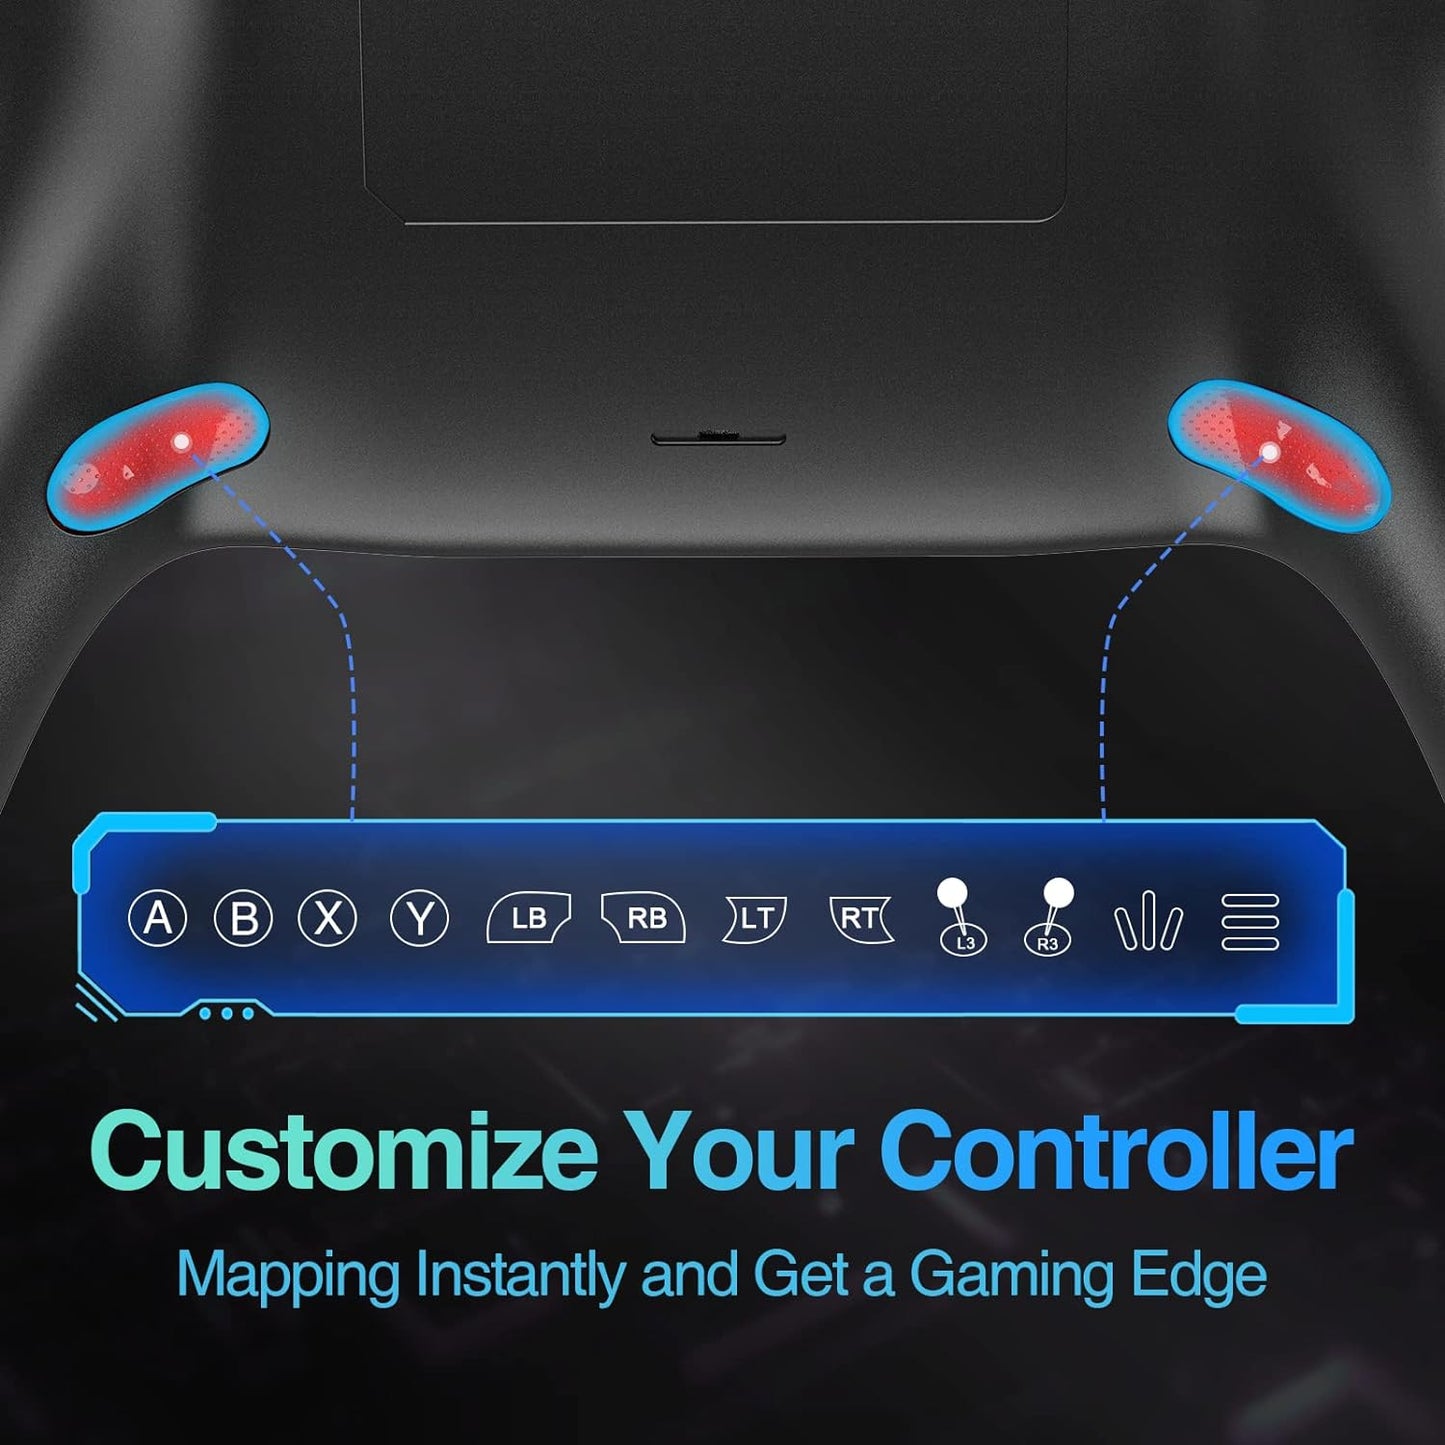 UGAME Wireless Controller for PS4 Controller, Ymir Game Remote for Playstation 4 Controller with Turbo, Steam Gamepad Work with Back Paddles, Scuf Controllers for PS4/Pro/Silm/PC/IOS (Midnight Blue)